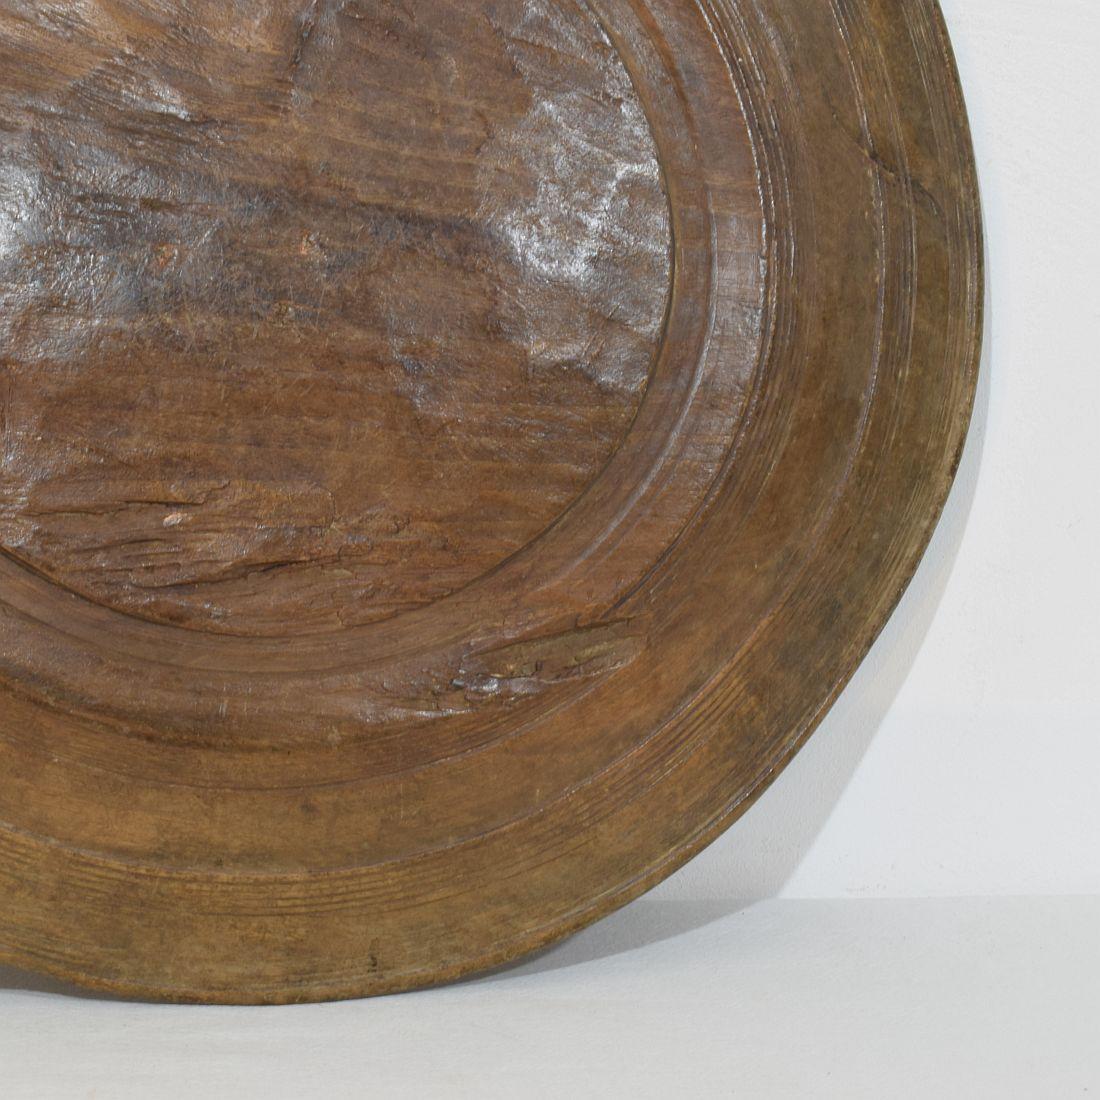 Large 18th Century French Wooden Bowl / Platter For Sale 10